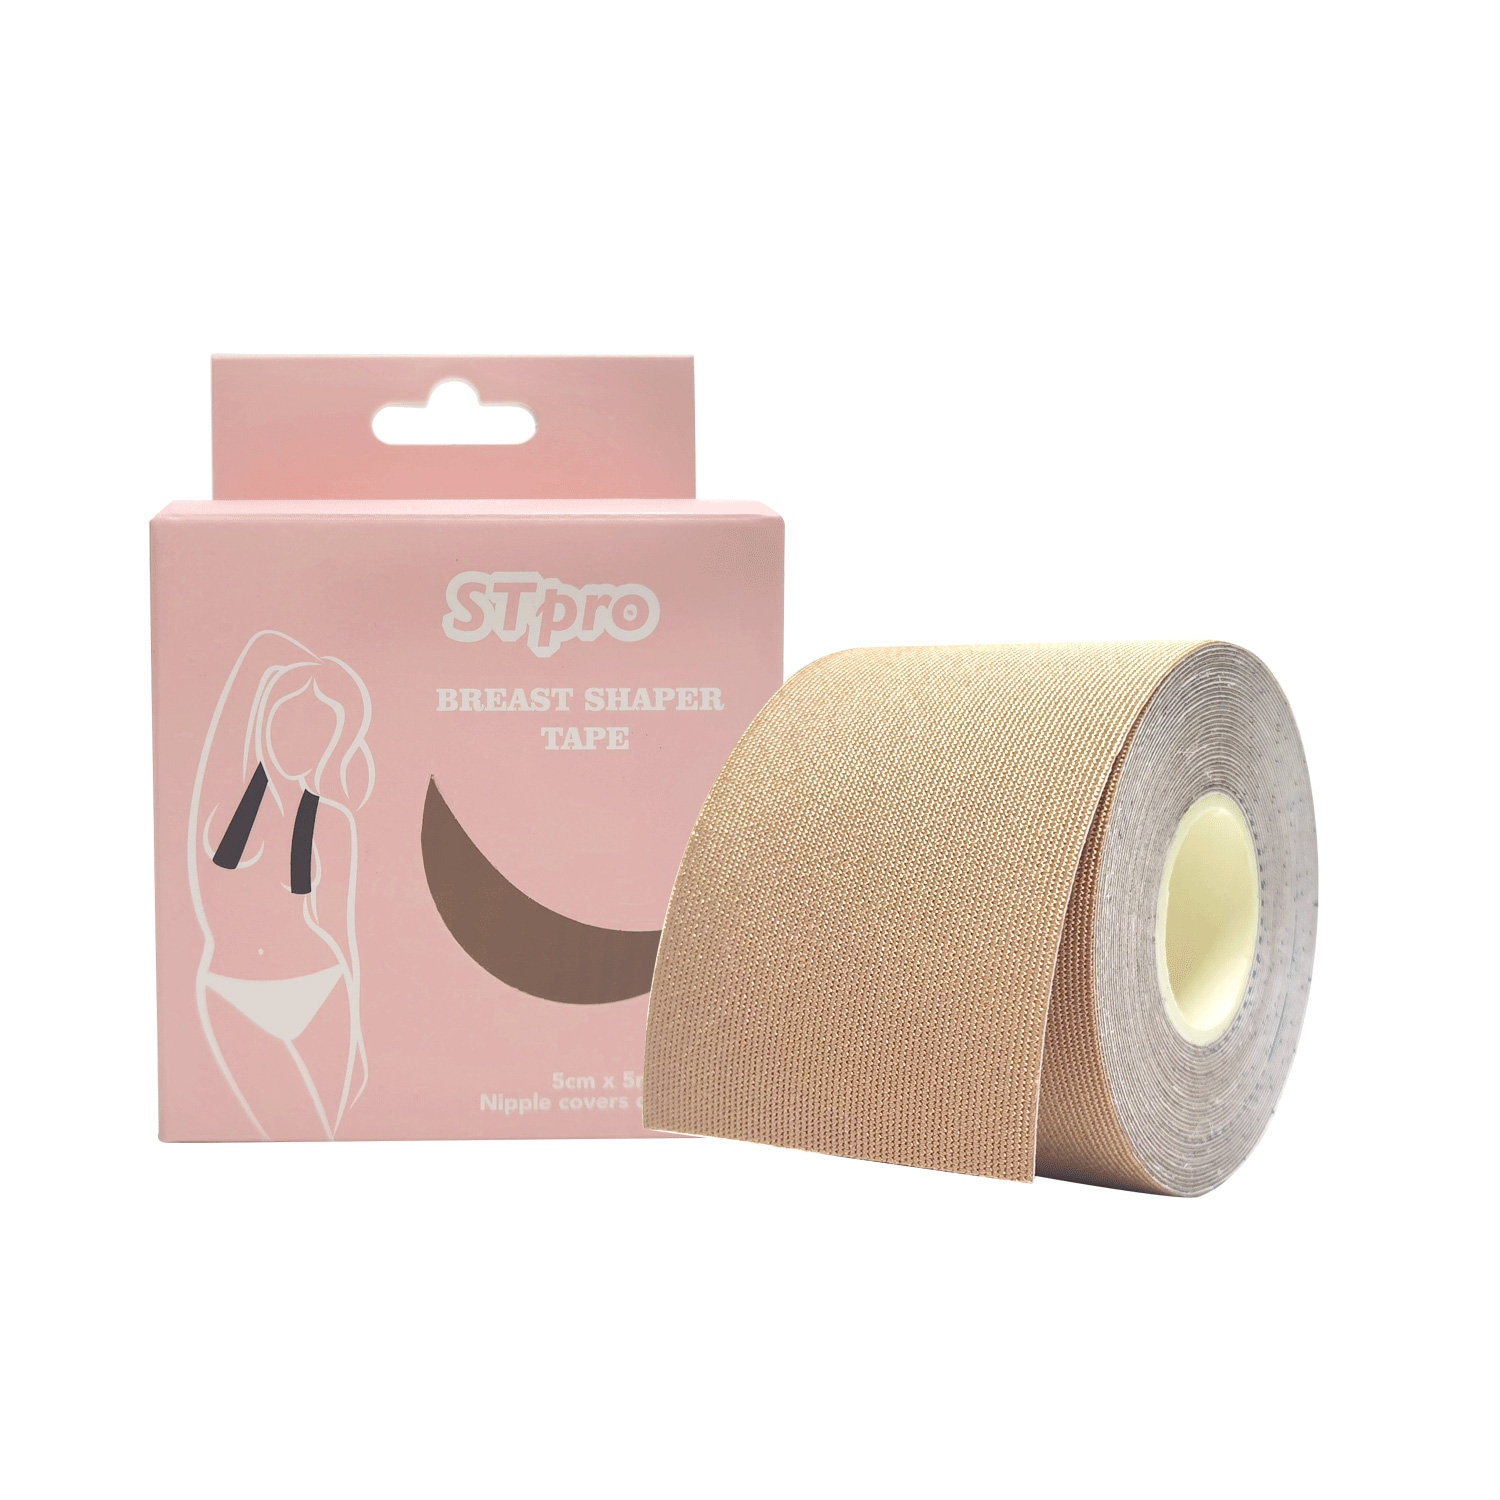 Breast Lift Tape, Uplift Bra Tape, Push Up Boob Tape, Enhancers Nipple Cover  Instant Breast Support Tape for Small & Large Boobs (5Mx7.5CM) price in UAE,  UAE